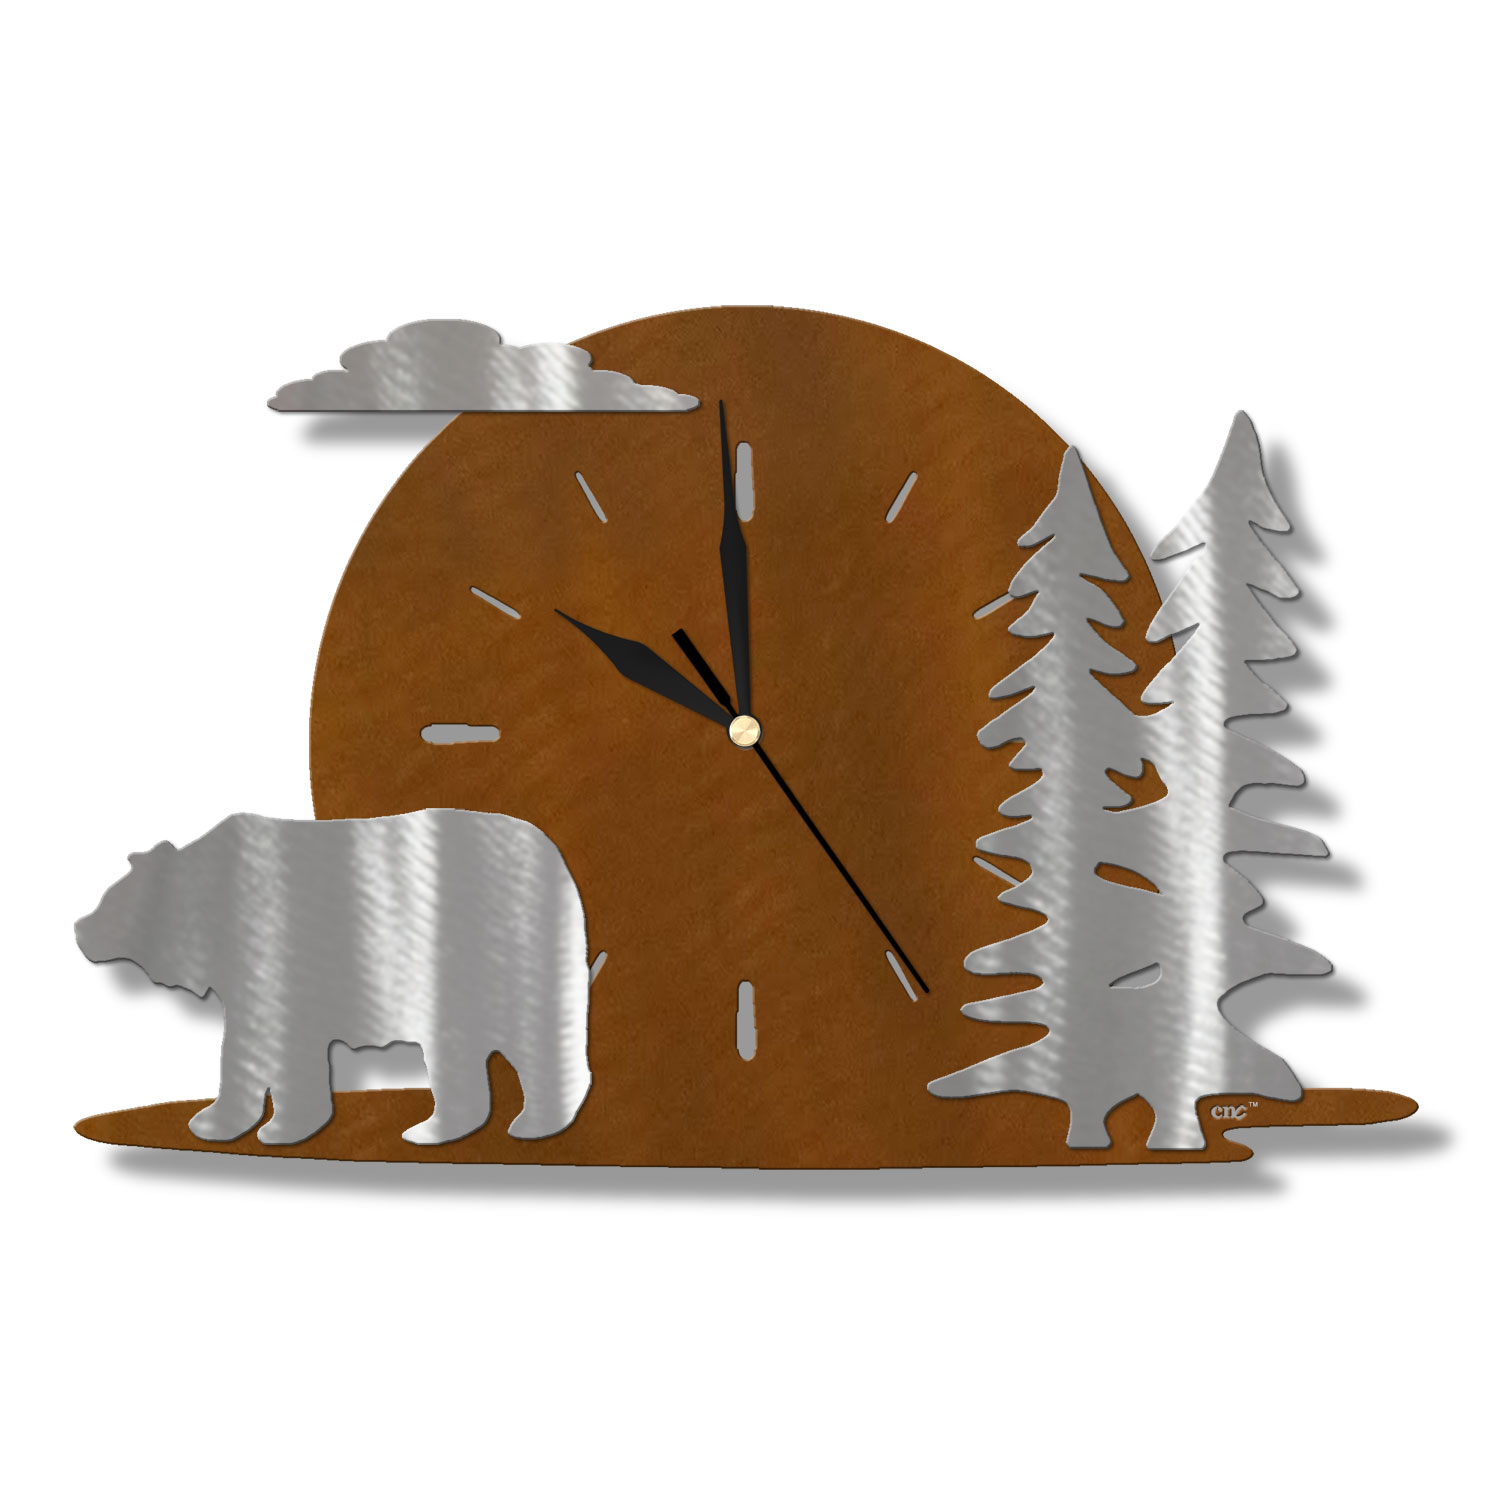 Moonrise 15in Wall Clock - Bear and Trees in Rust Patina - stk